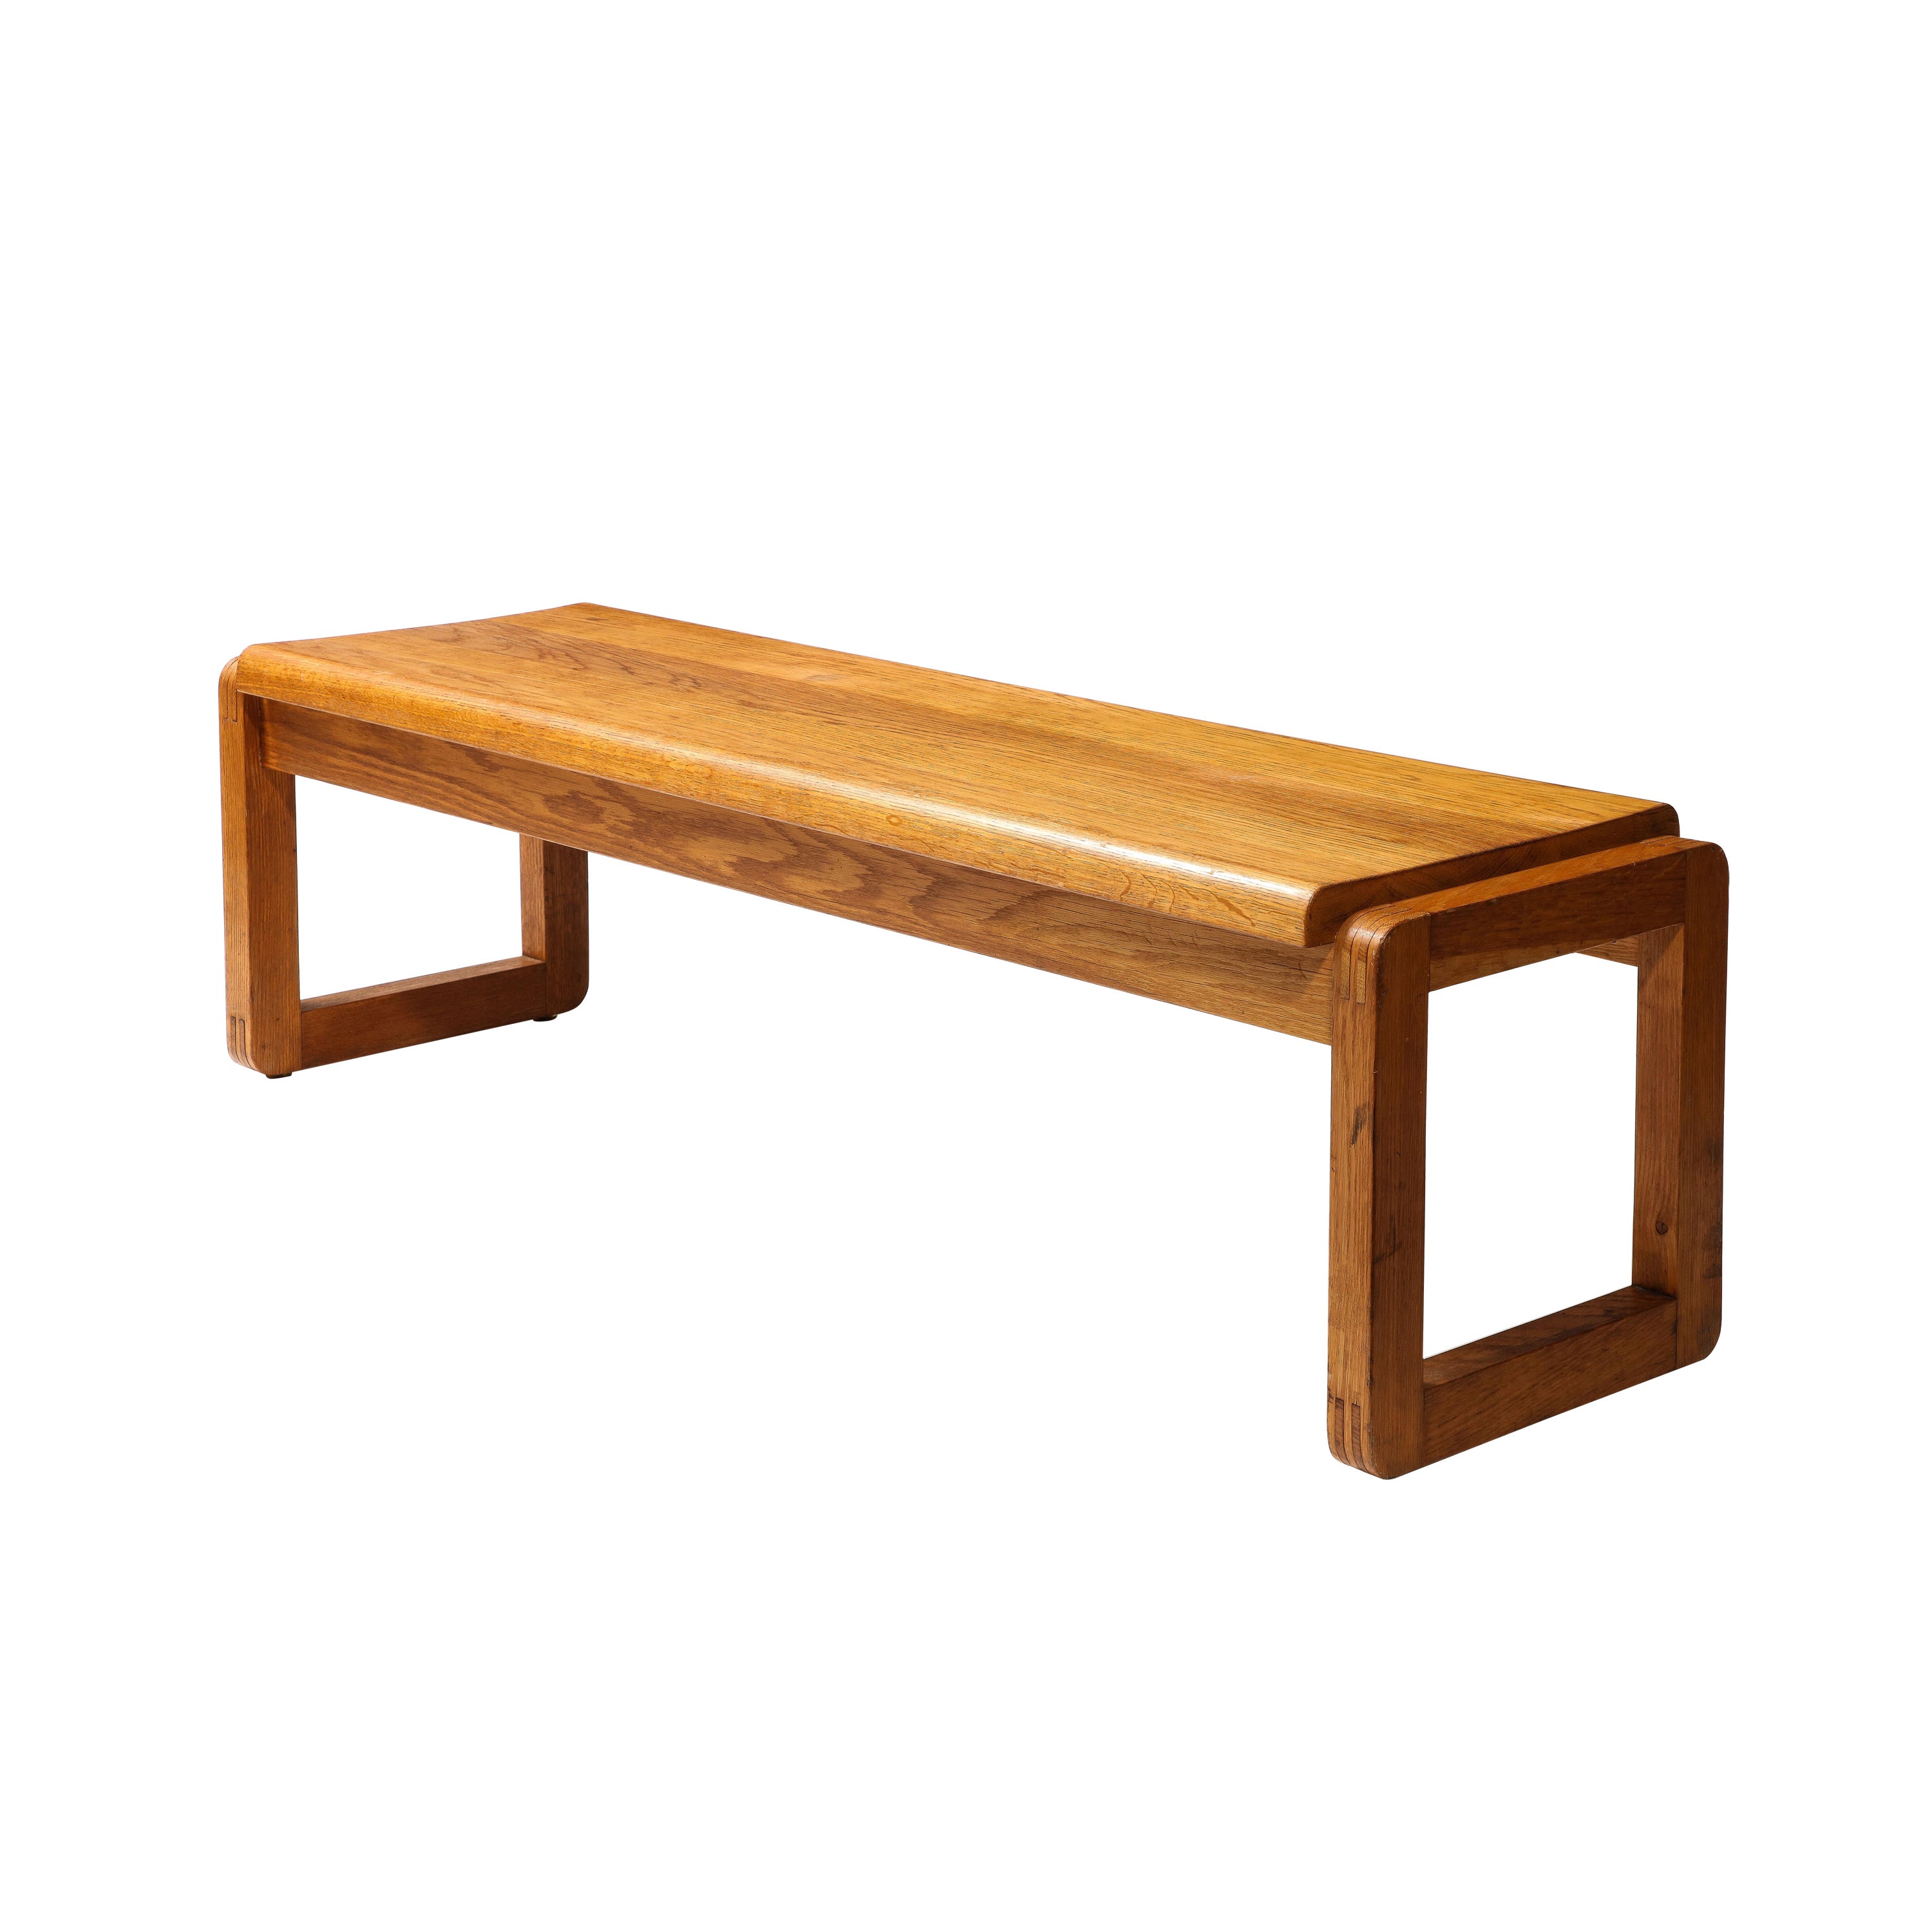 Minimalist Solid Oak Bench in style of Guillerme & Chambron  - Netherlands 1970s For Sale